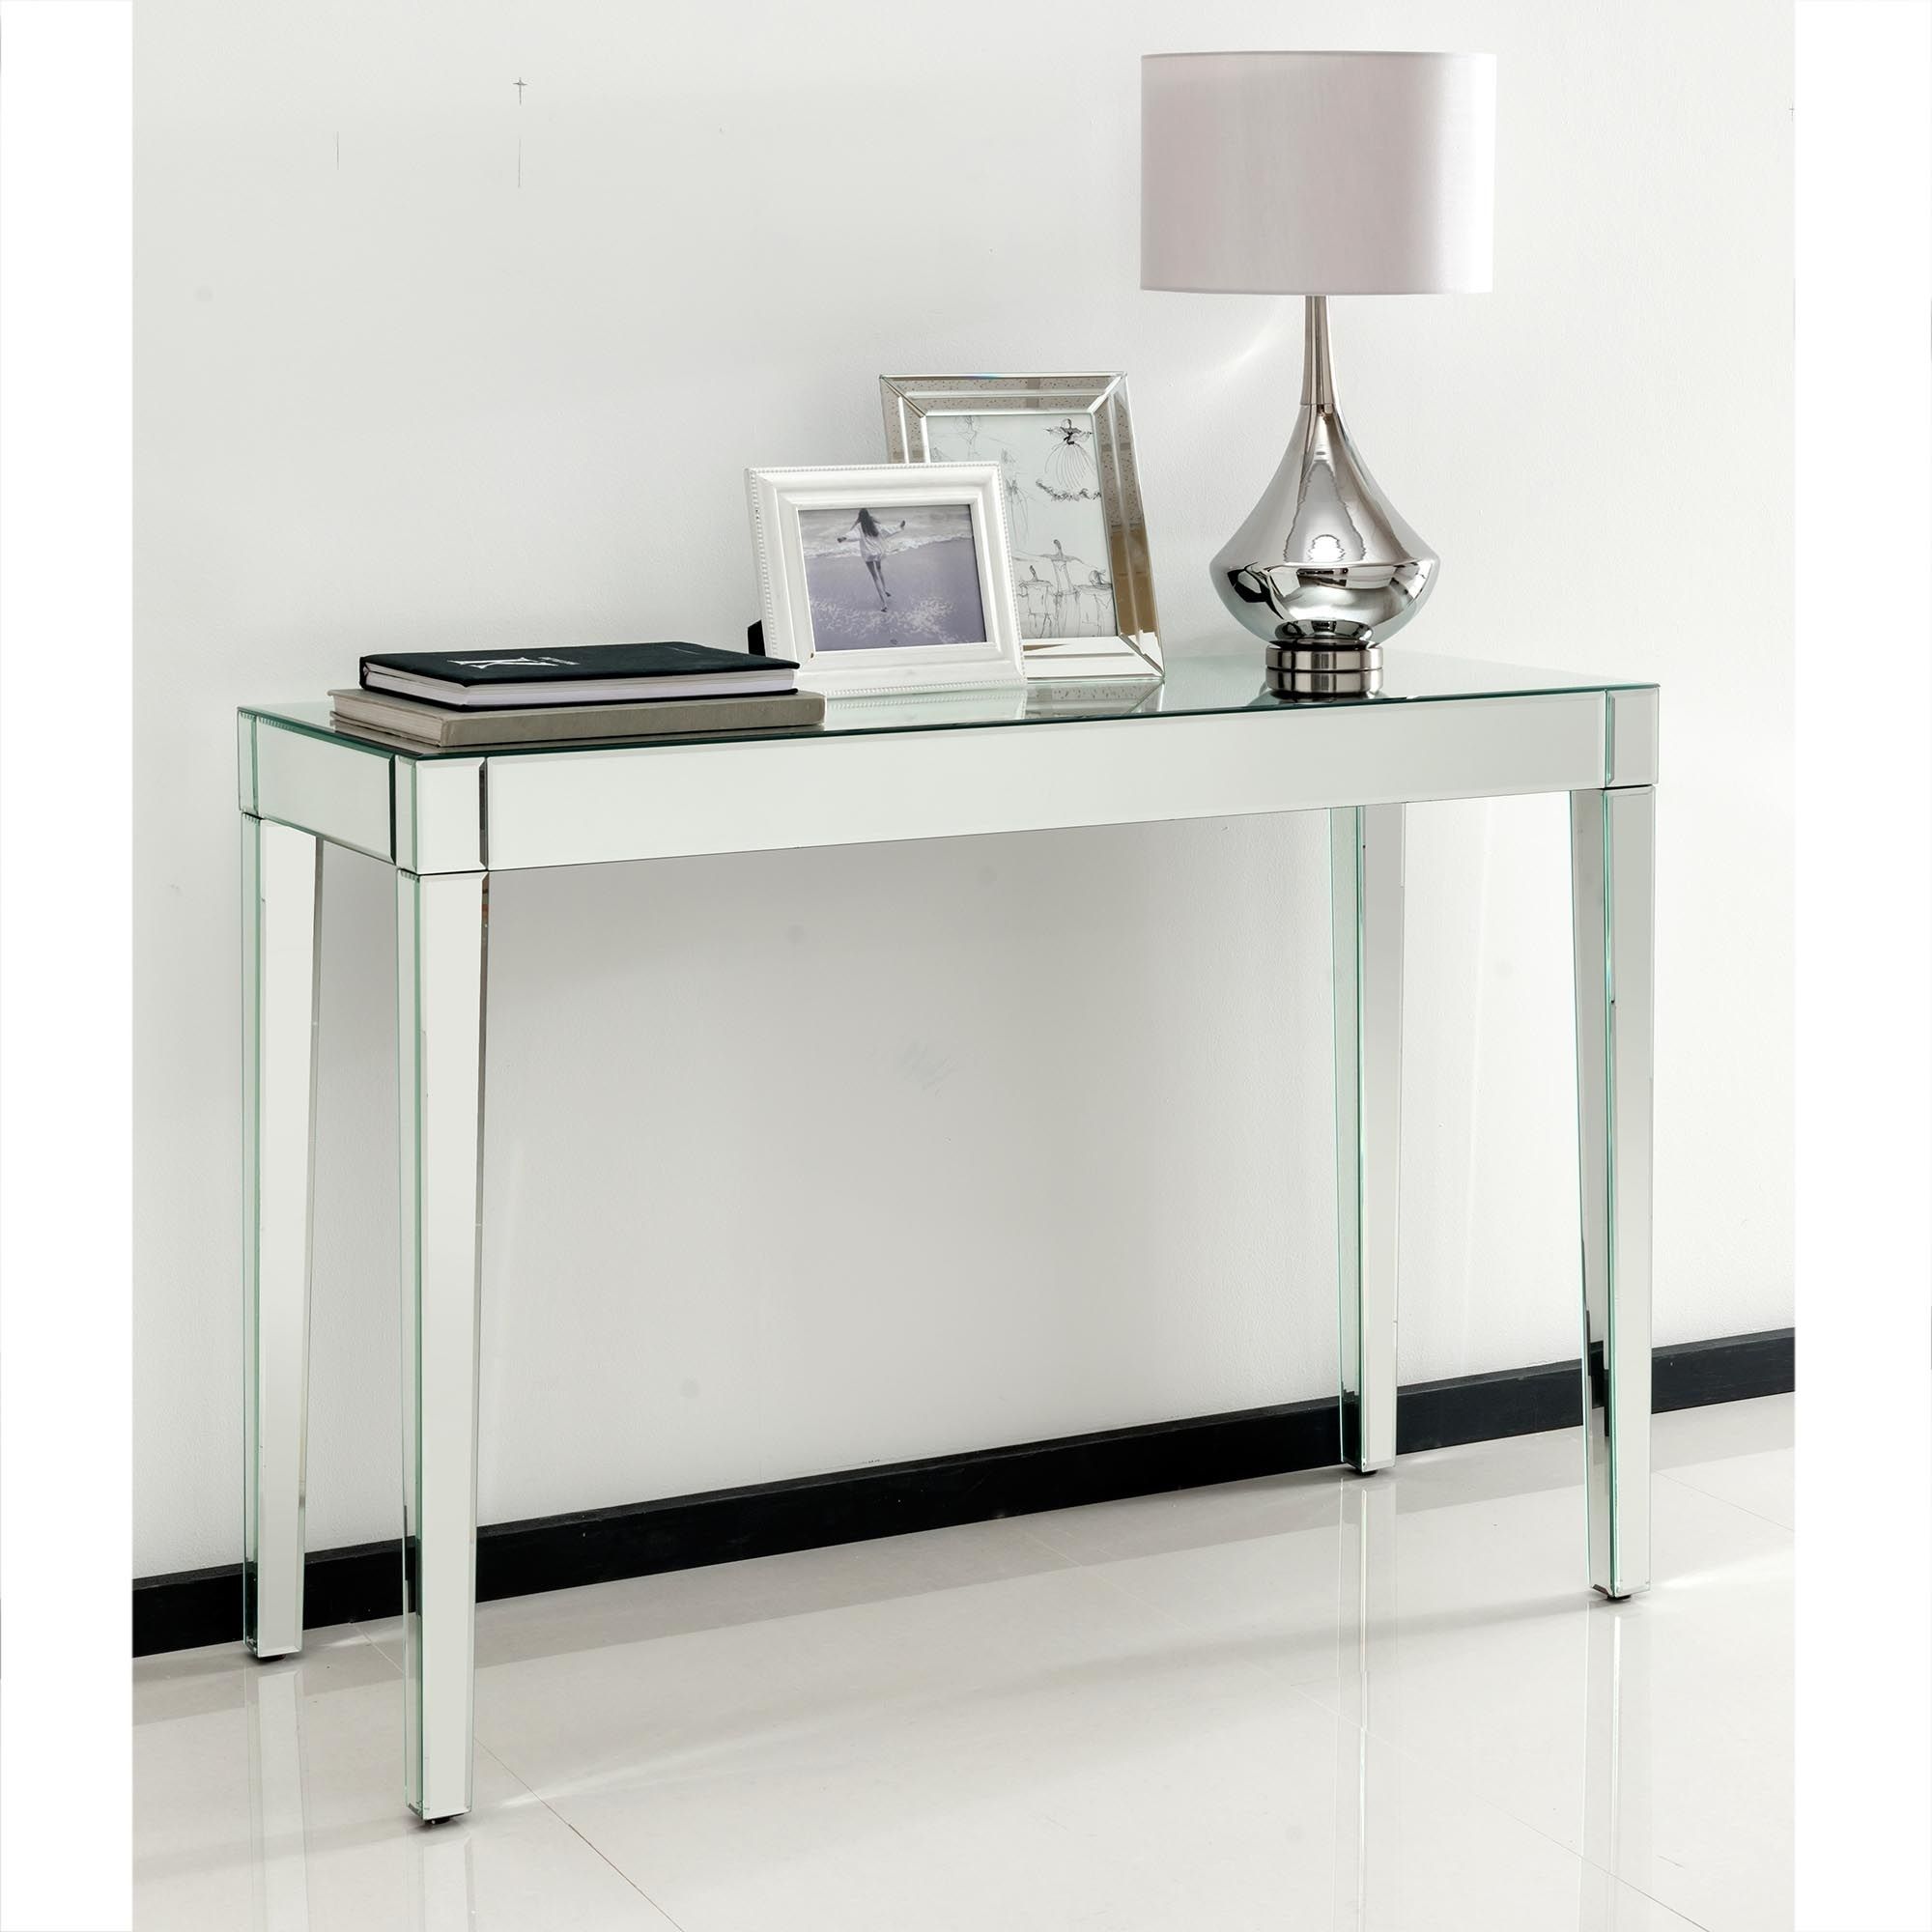 Venetian Glass Console Table With Mirrored Modern Console Tables (View 6 of 20)